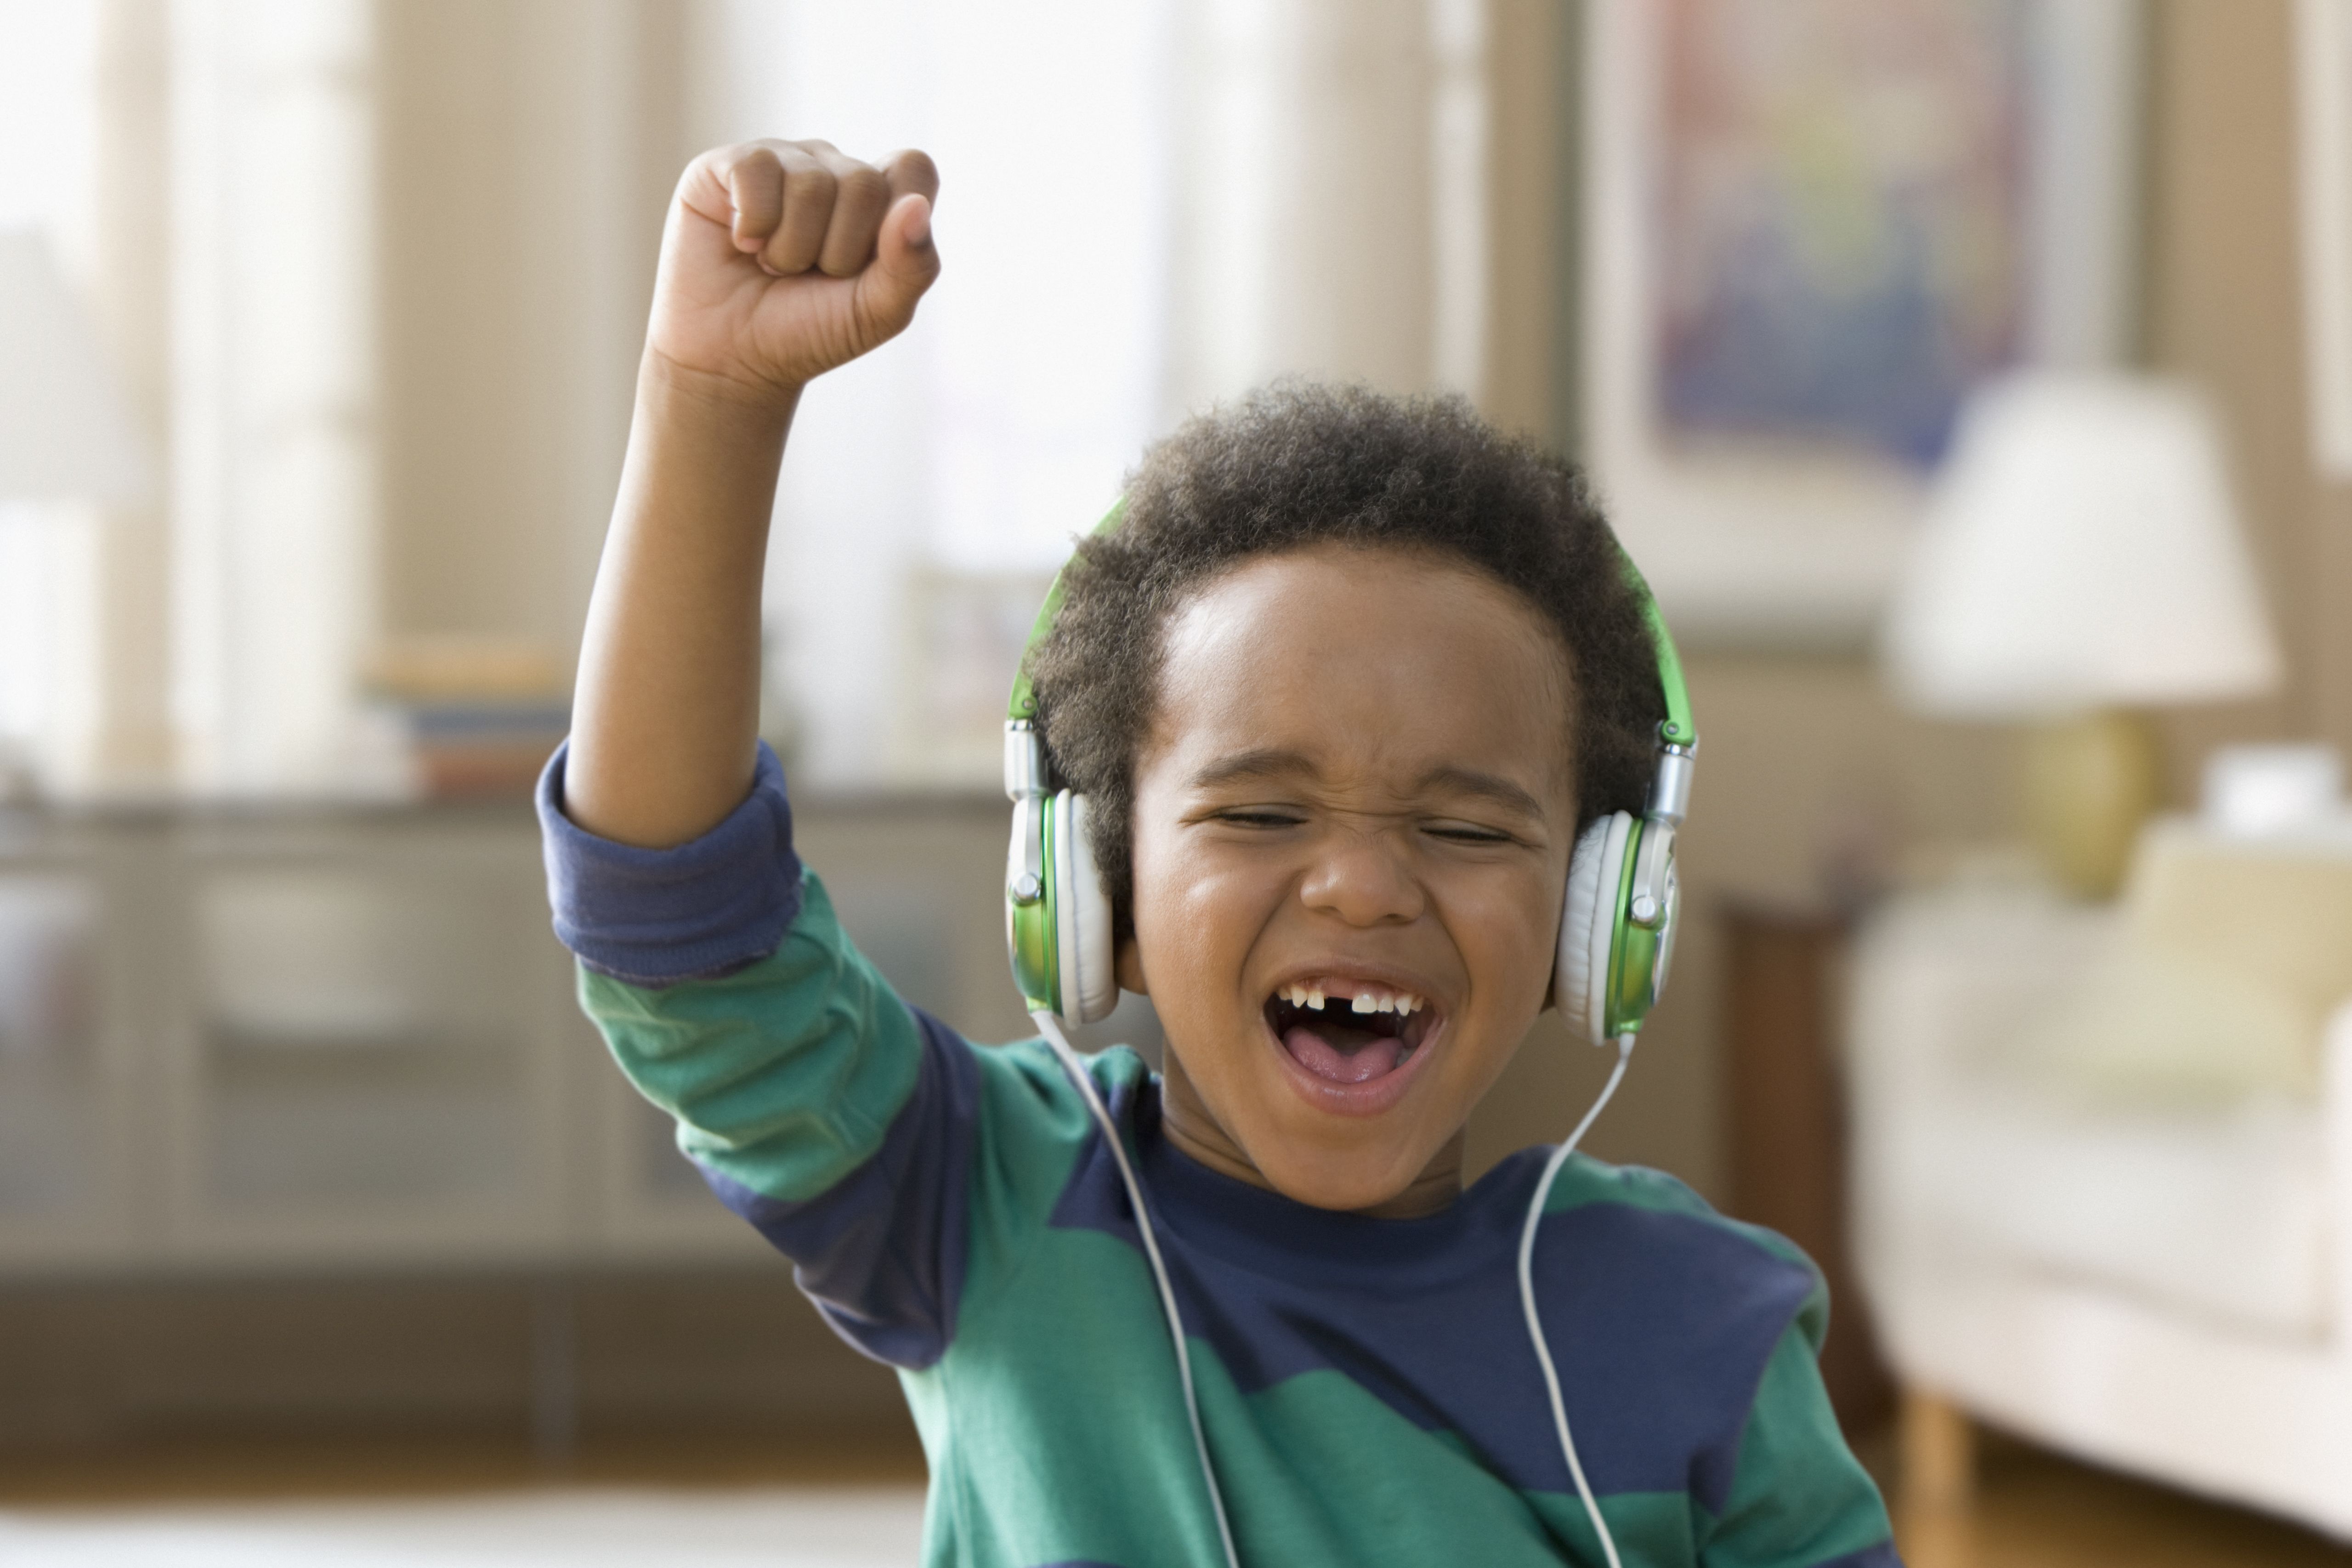 A child listening to music on headphones. 